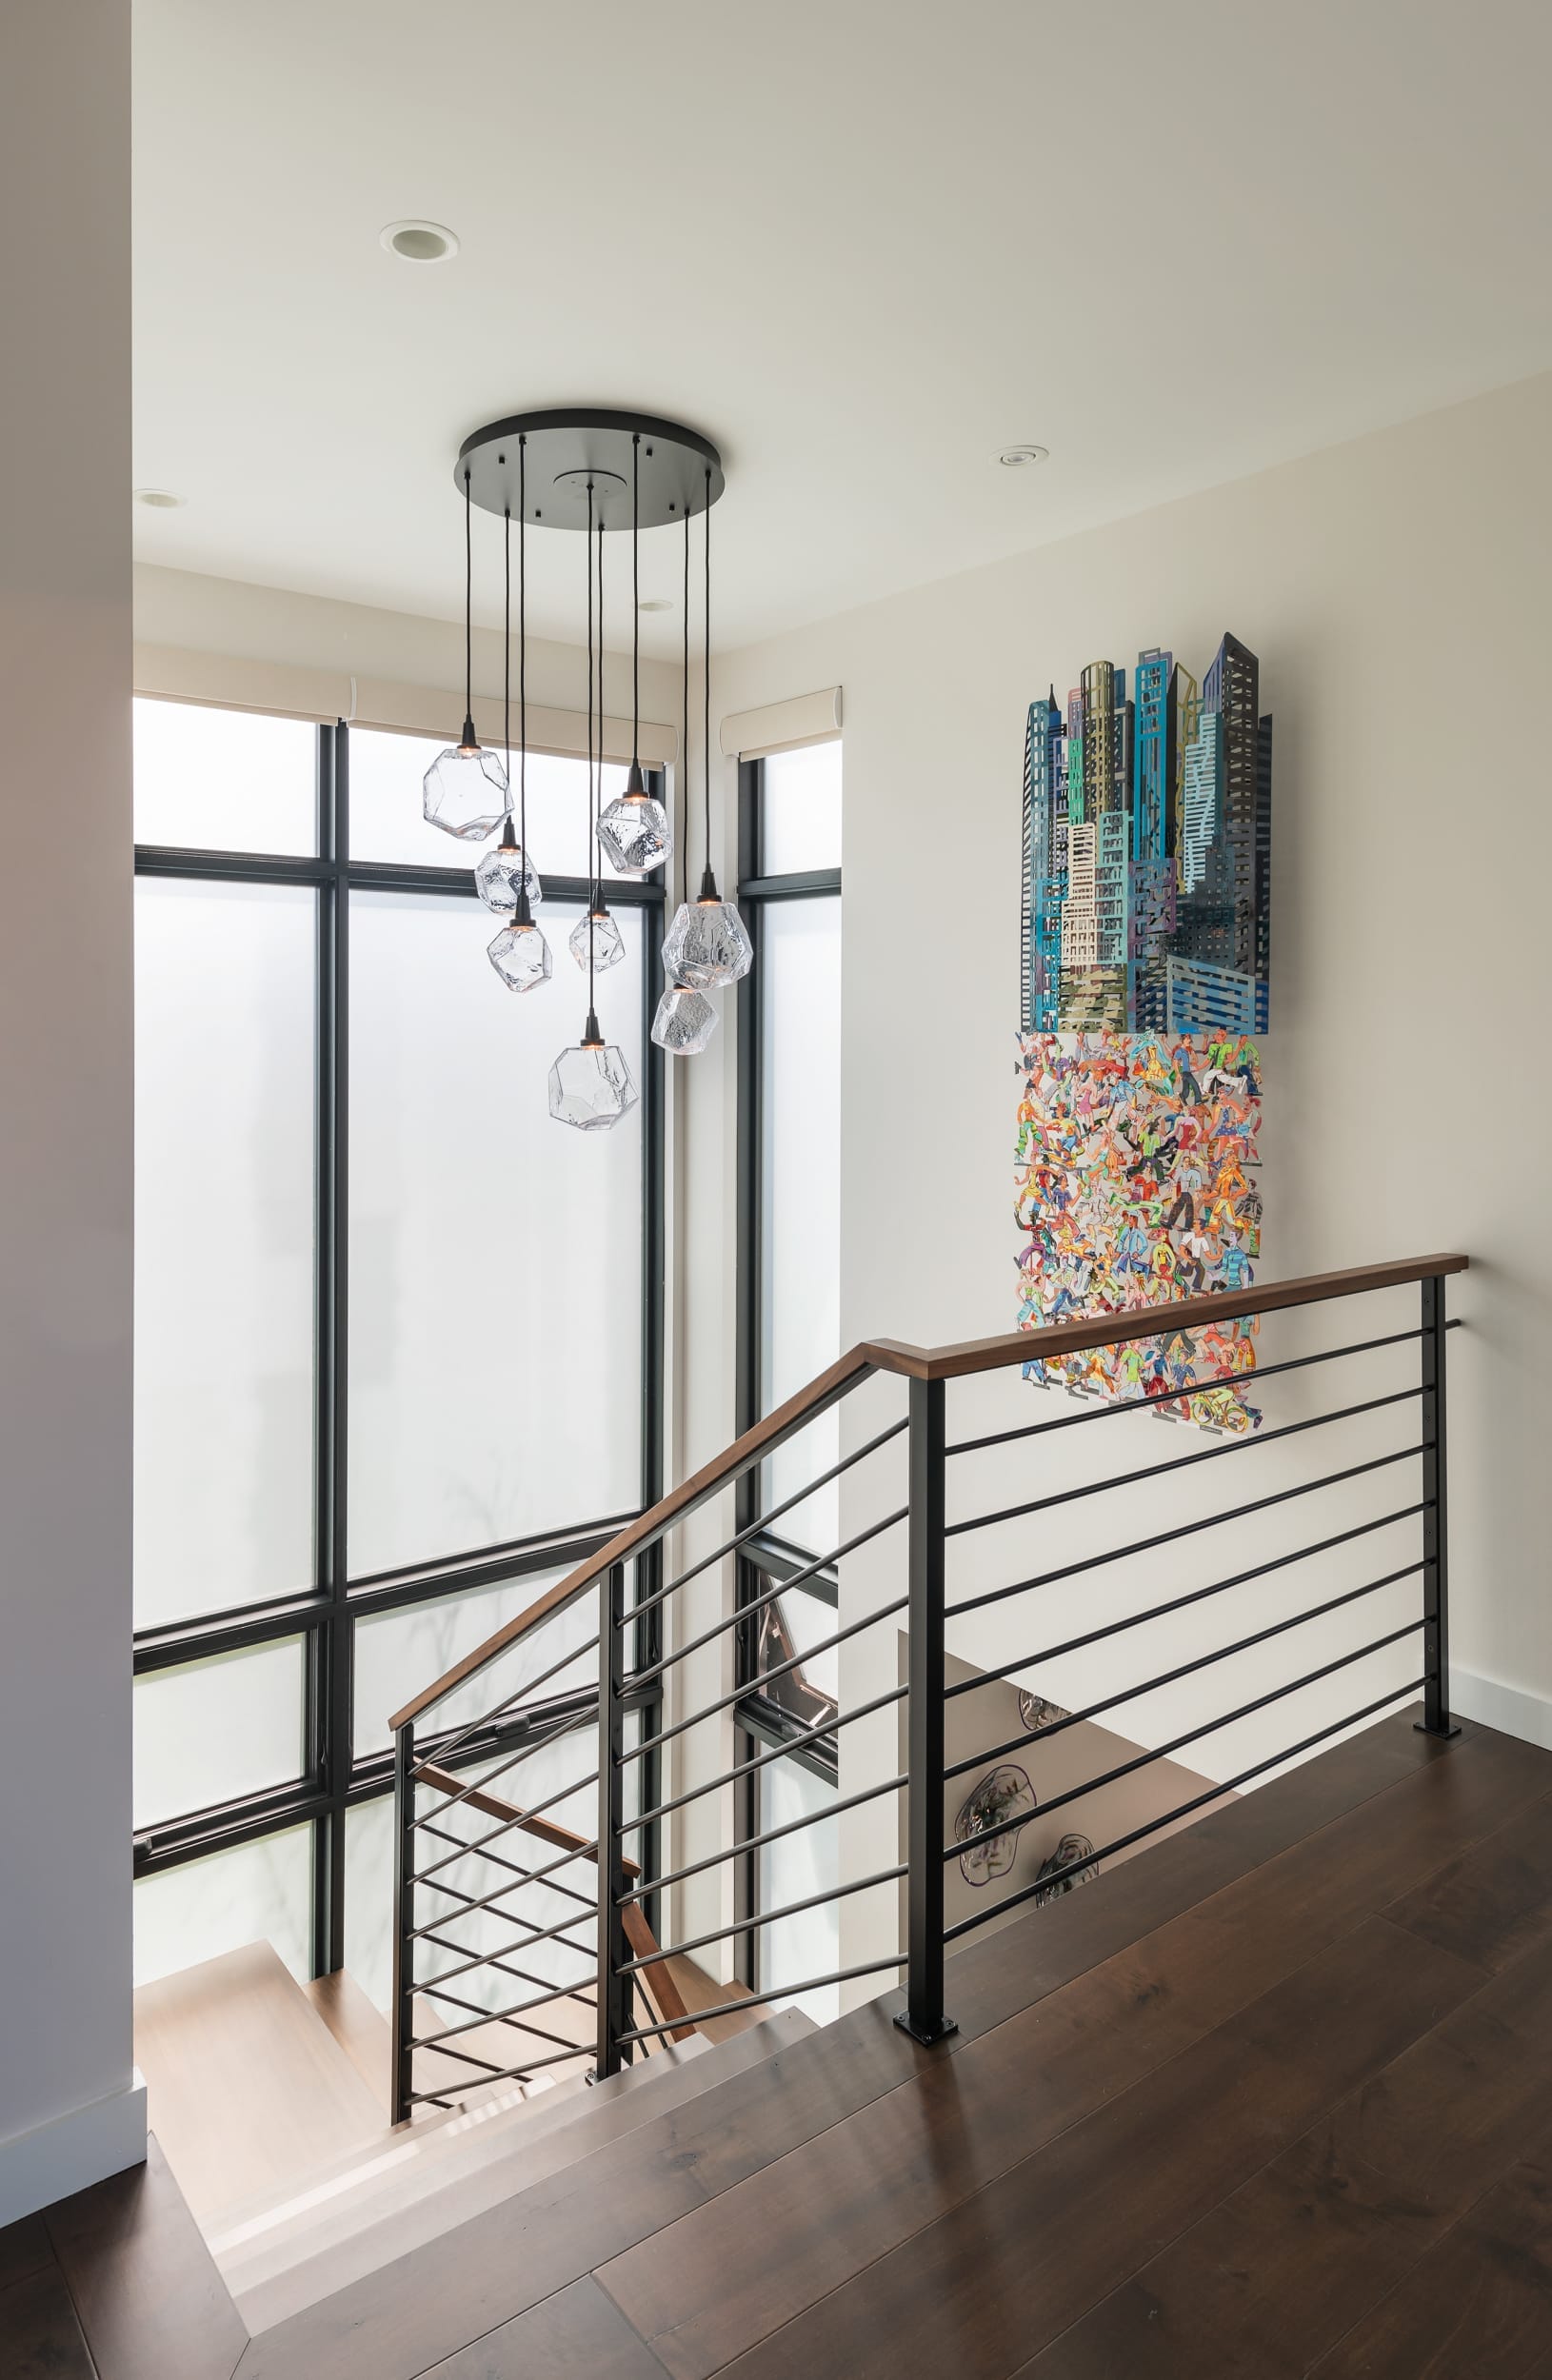 A modern home staircase featuring a painting on the wall, skillfully crafted by a carpenter.